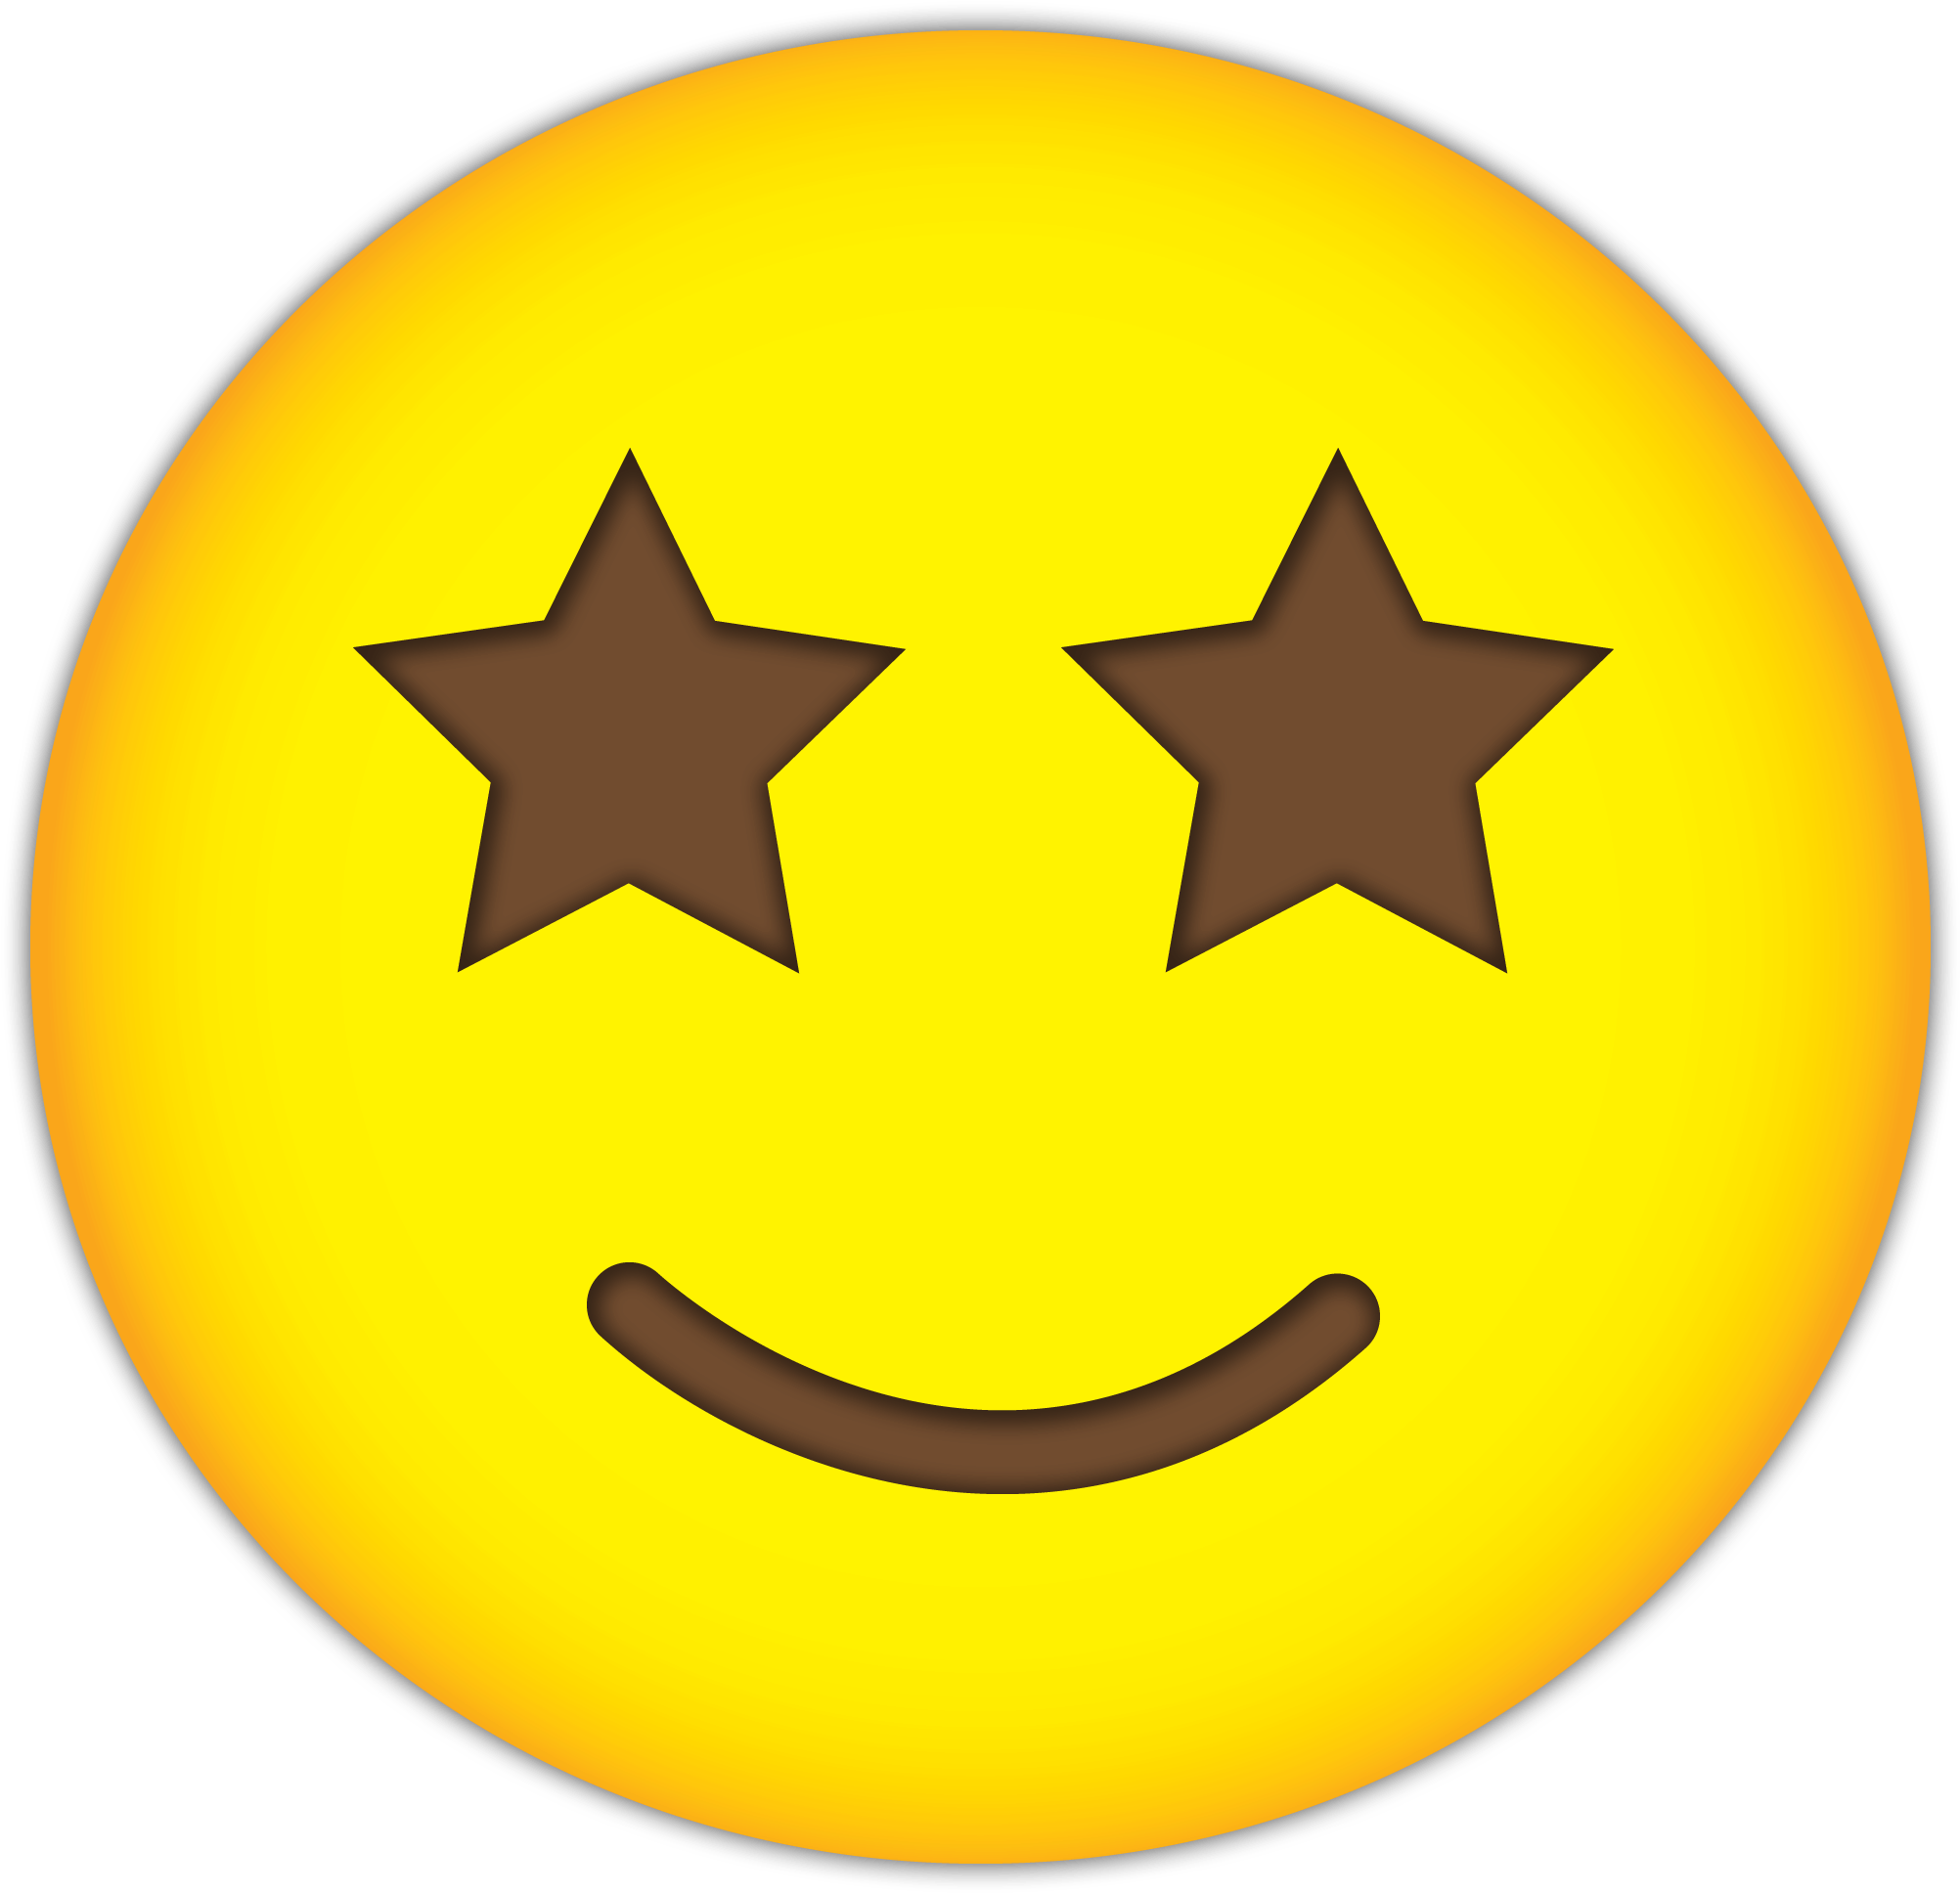 A Yellow Smiley Face With Stars And A Smile